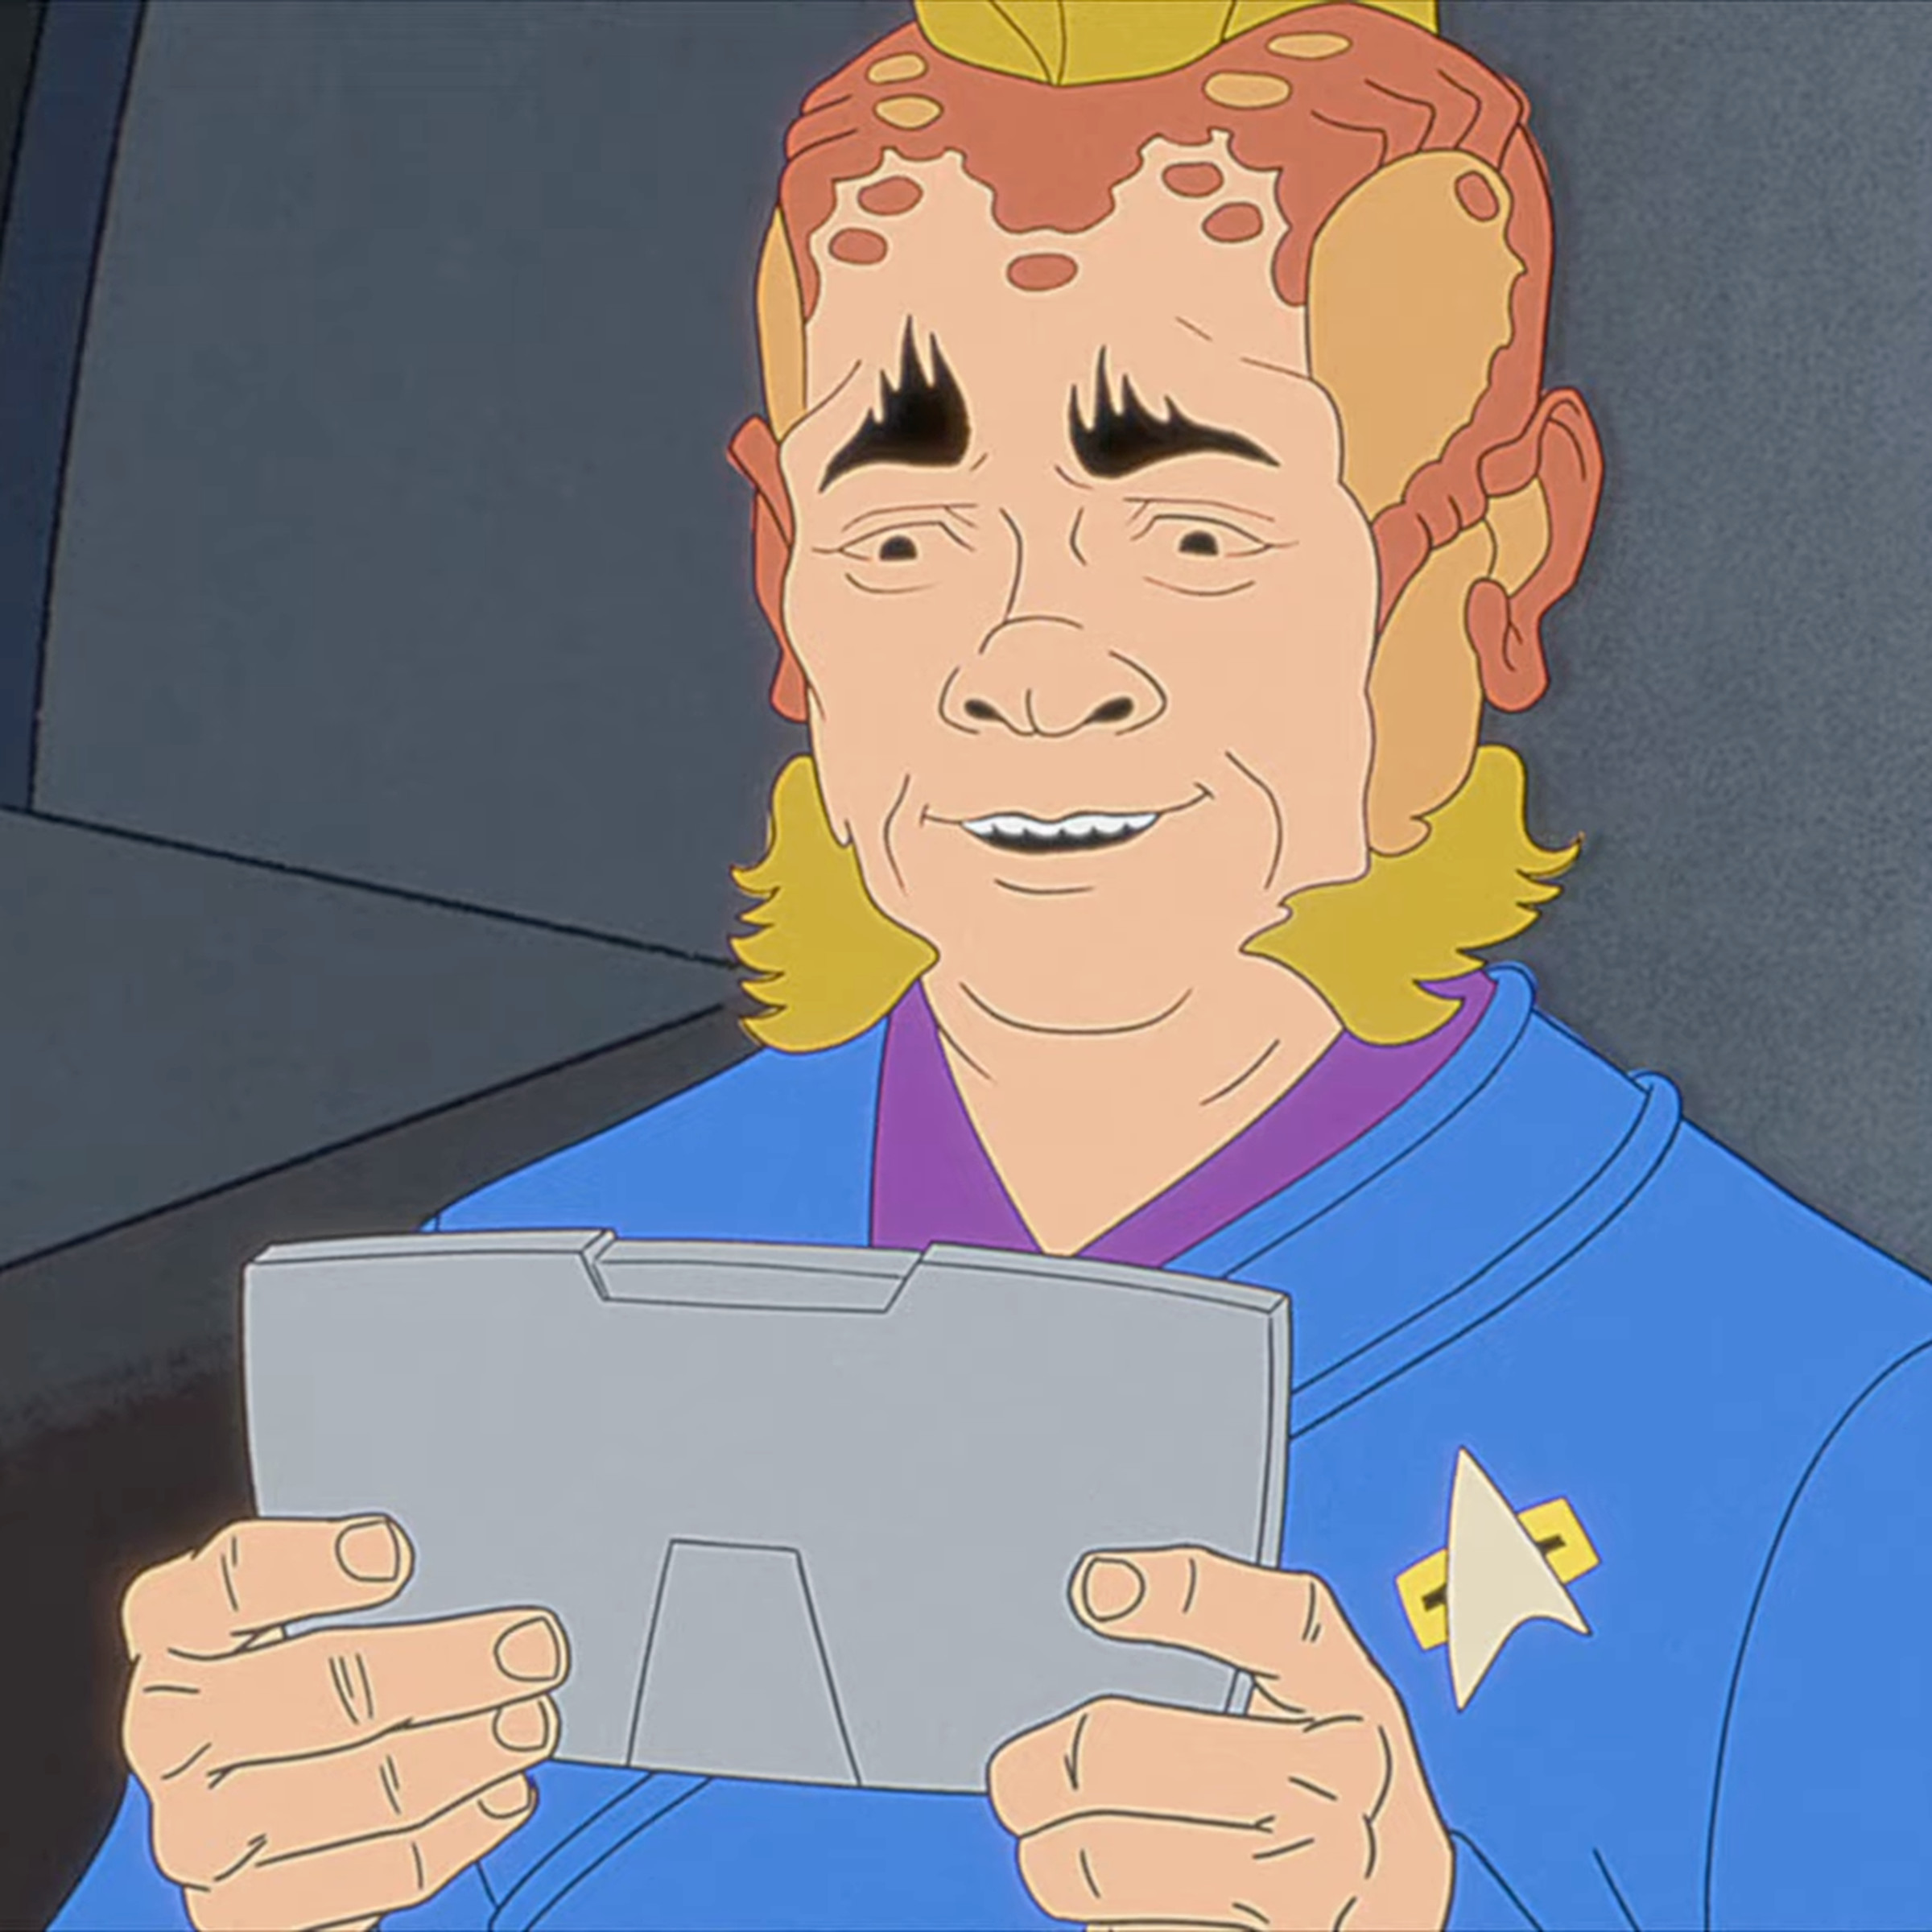 Clip from “very Short Treks” depicting an animated Neelix